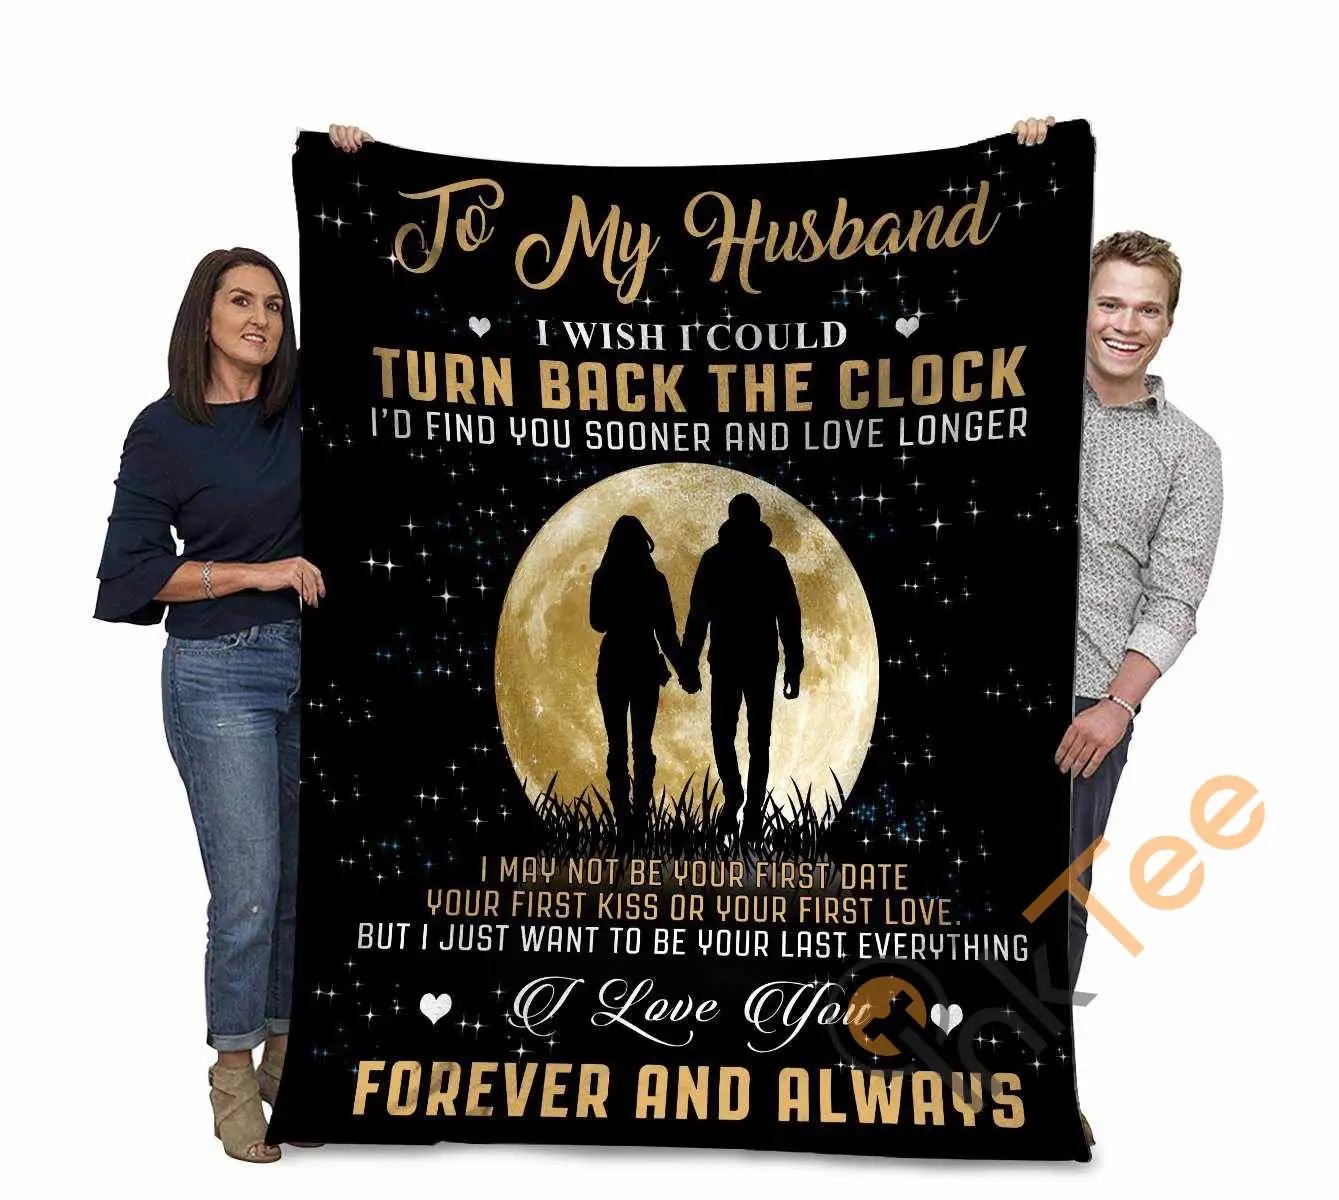 To My Husband I Wish I Could Turn Back The Clock I'd Find You Sooner And Love Longer Ultra Soft Cozy Plush Fleece Blanket